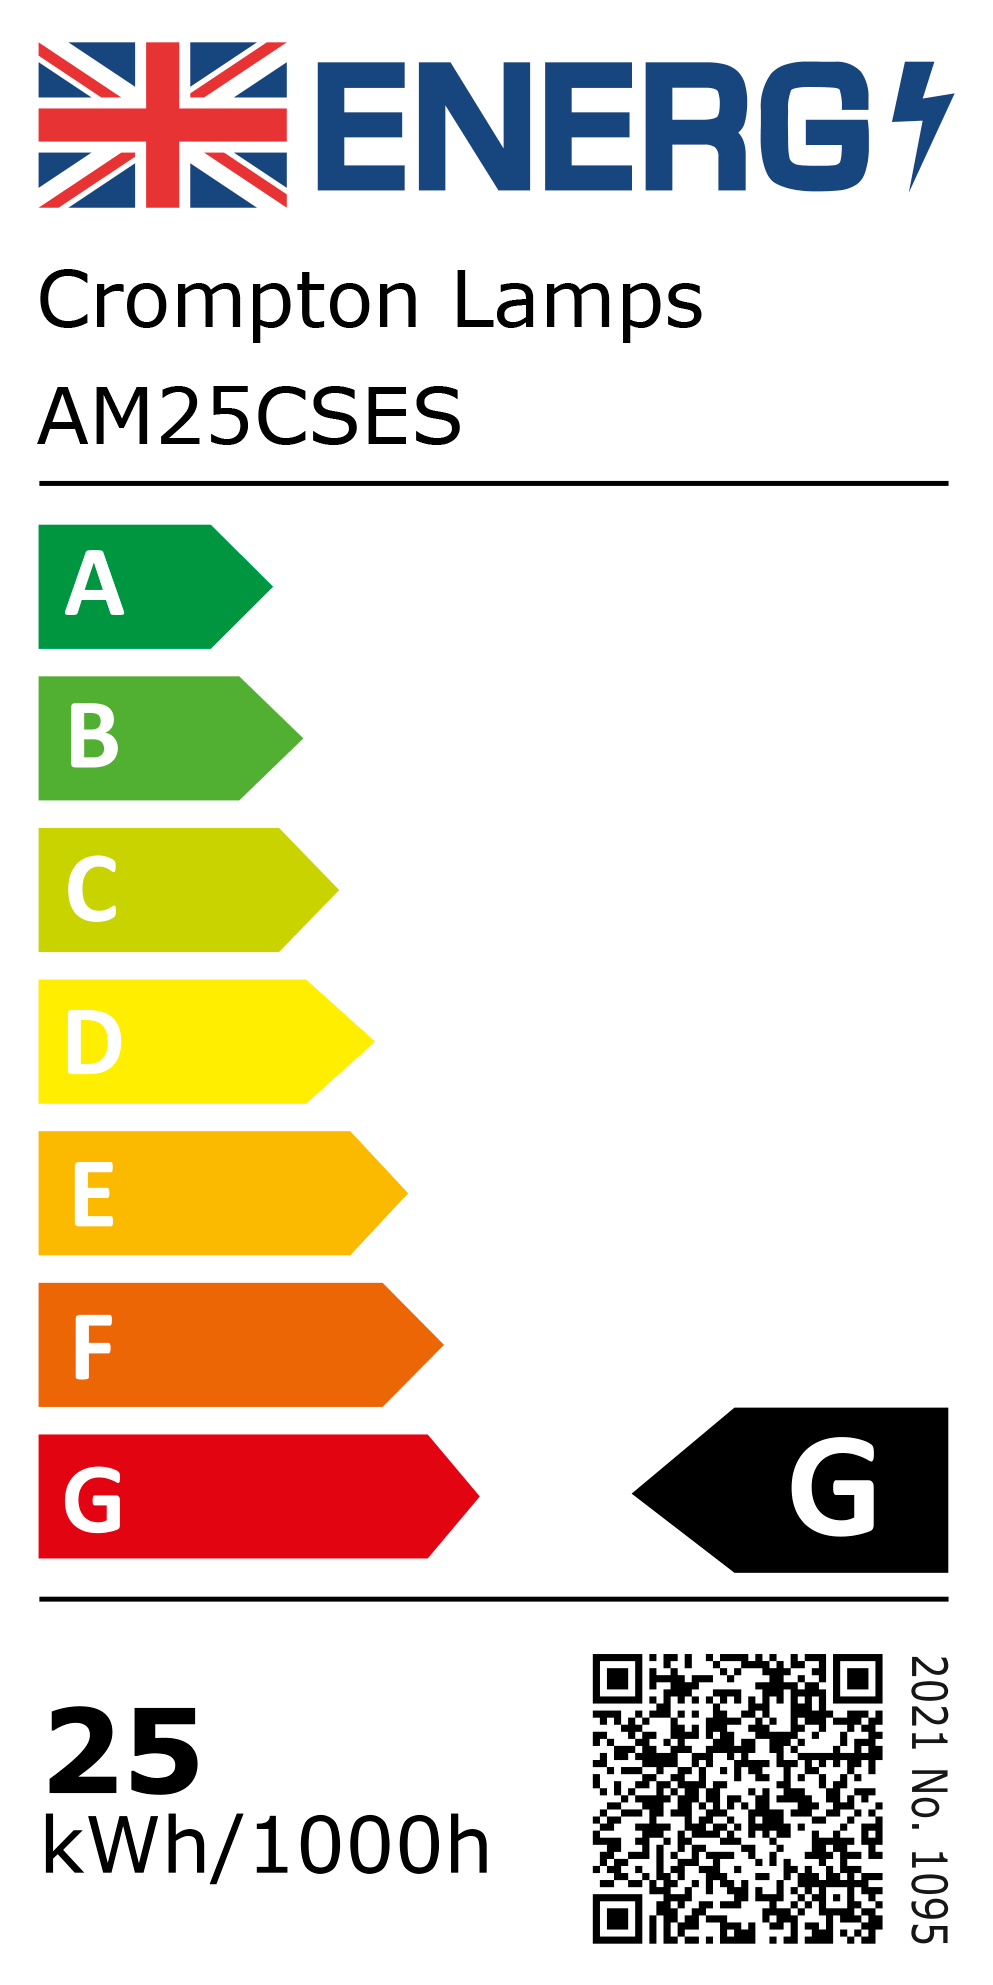 New 2021 Energy Rating Label: Stock Code AM25CSES